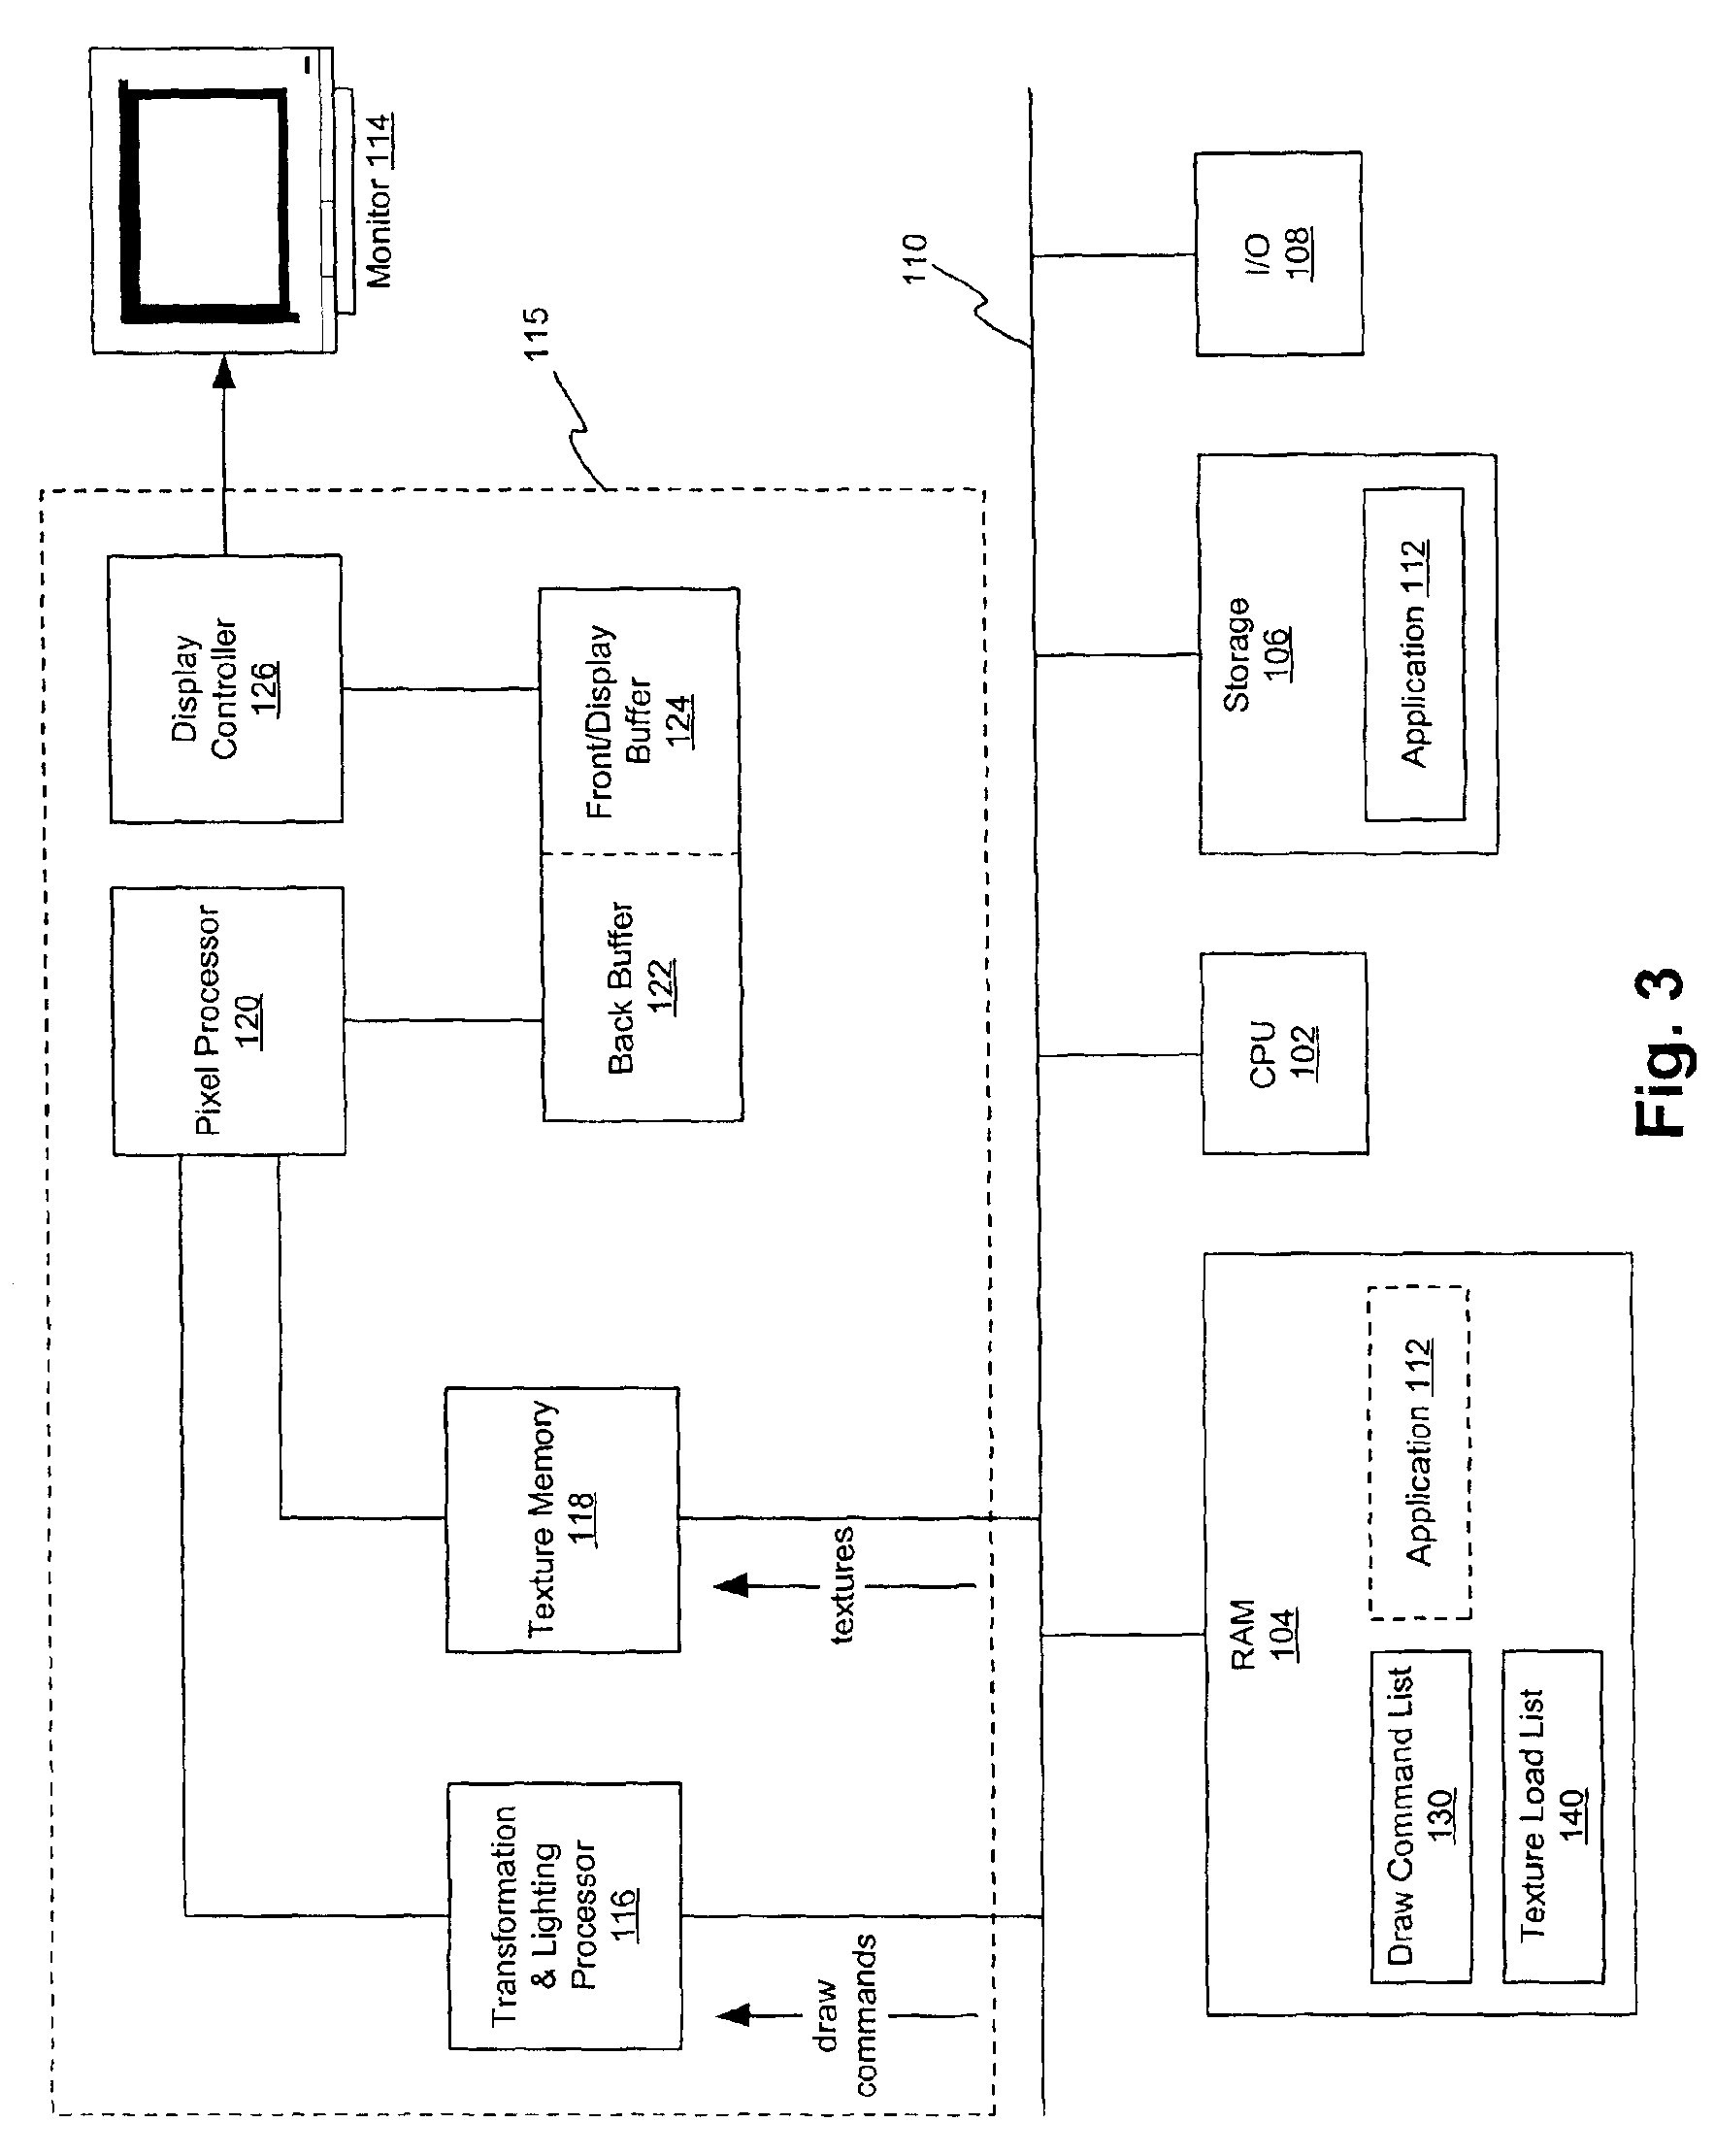 Management of limited resources in a graphics system